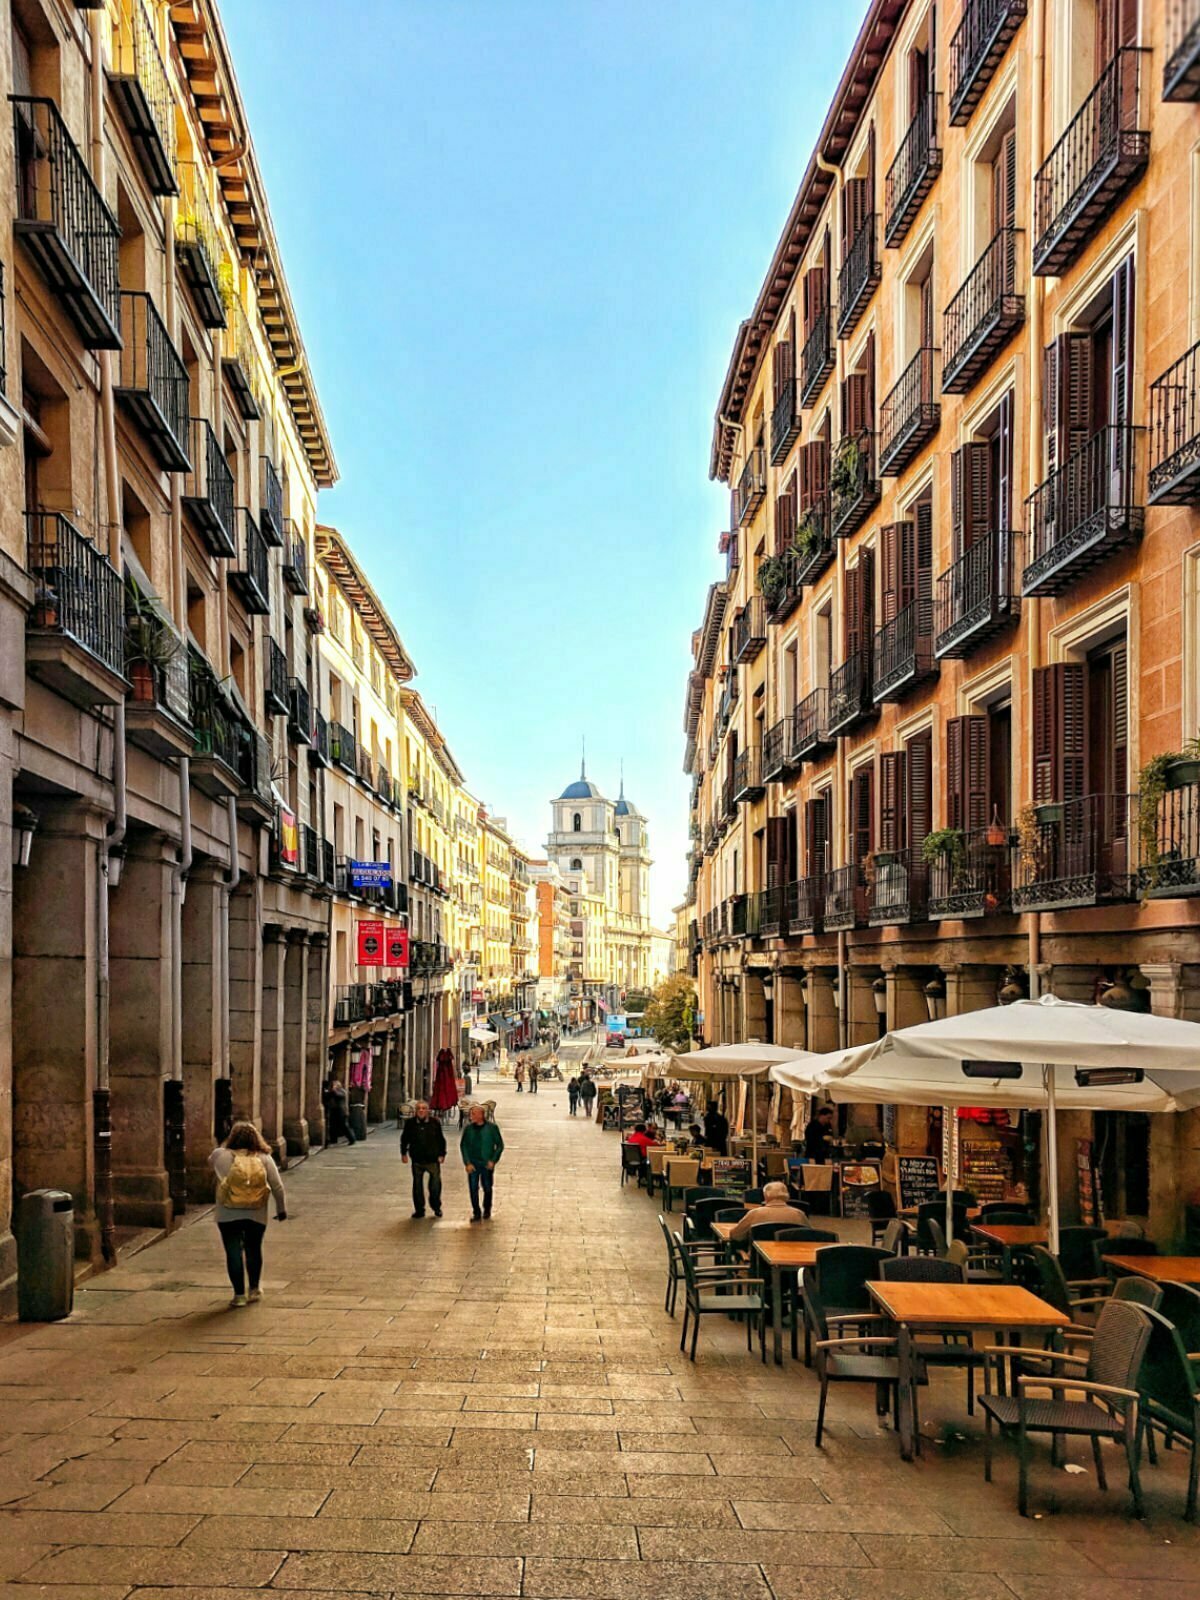 A view down a narrow street leading to Plaza Major in central Madrid